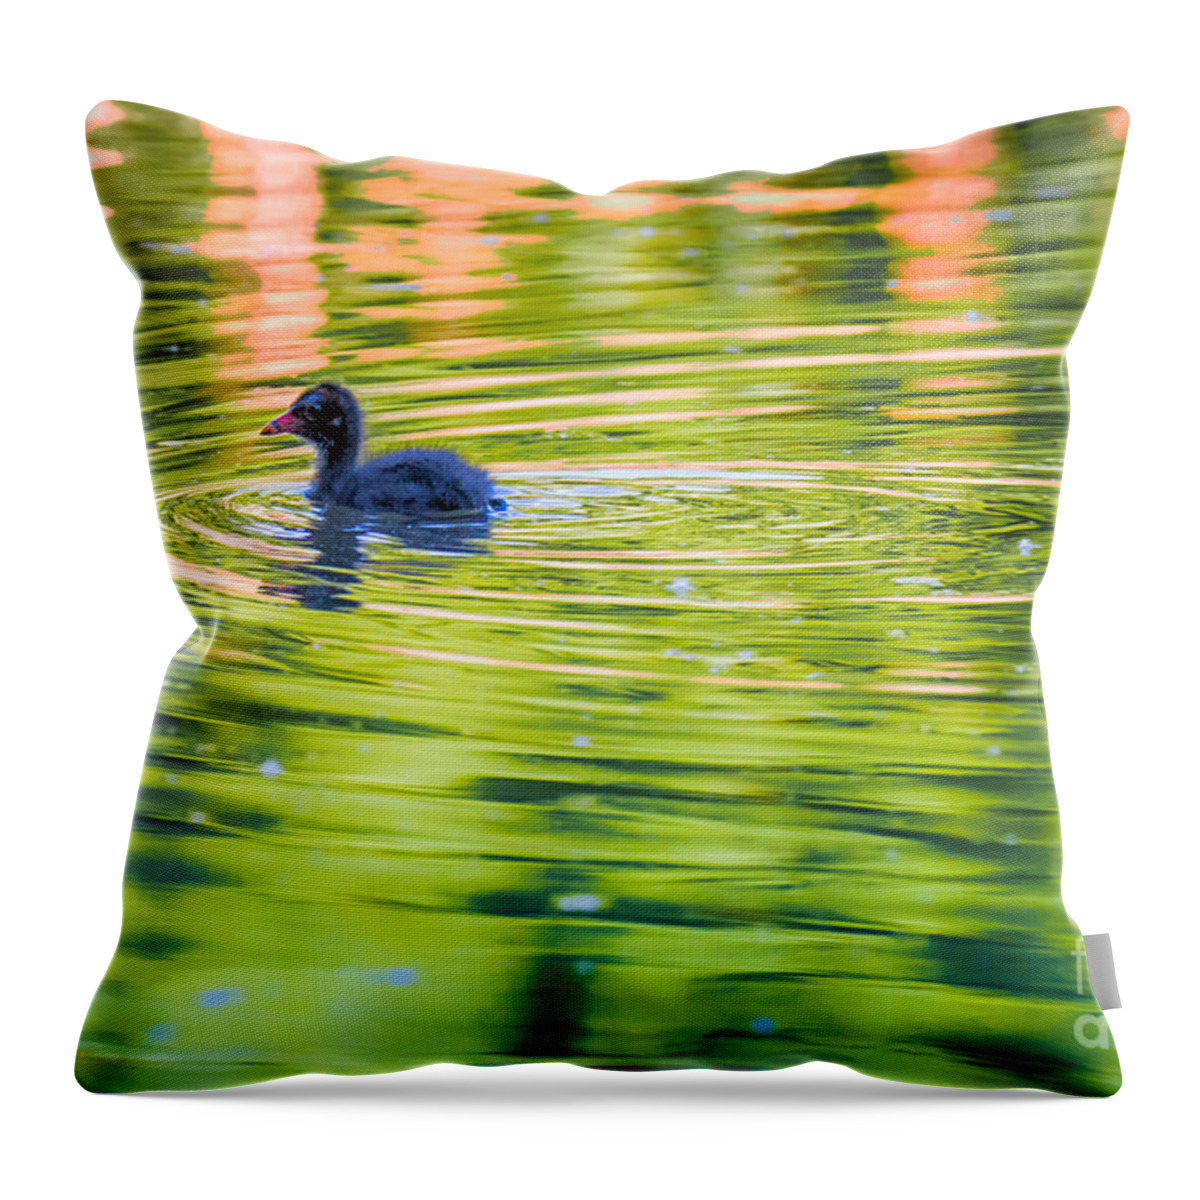 Animalia Throw Pillow featuring the photograph Common Moorhen Hatchling by Jivko Nakev